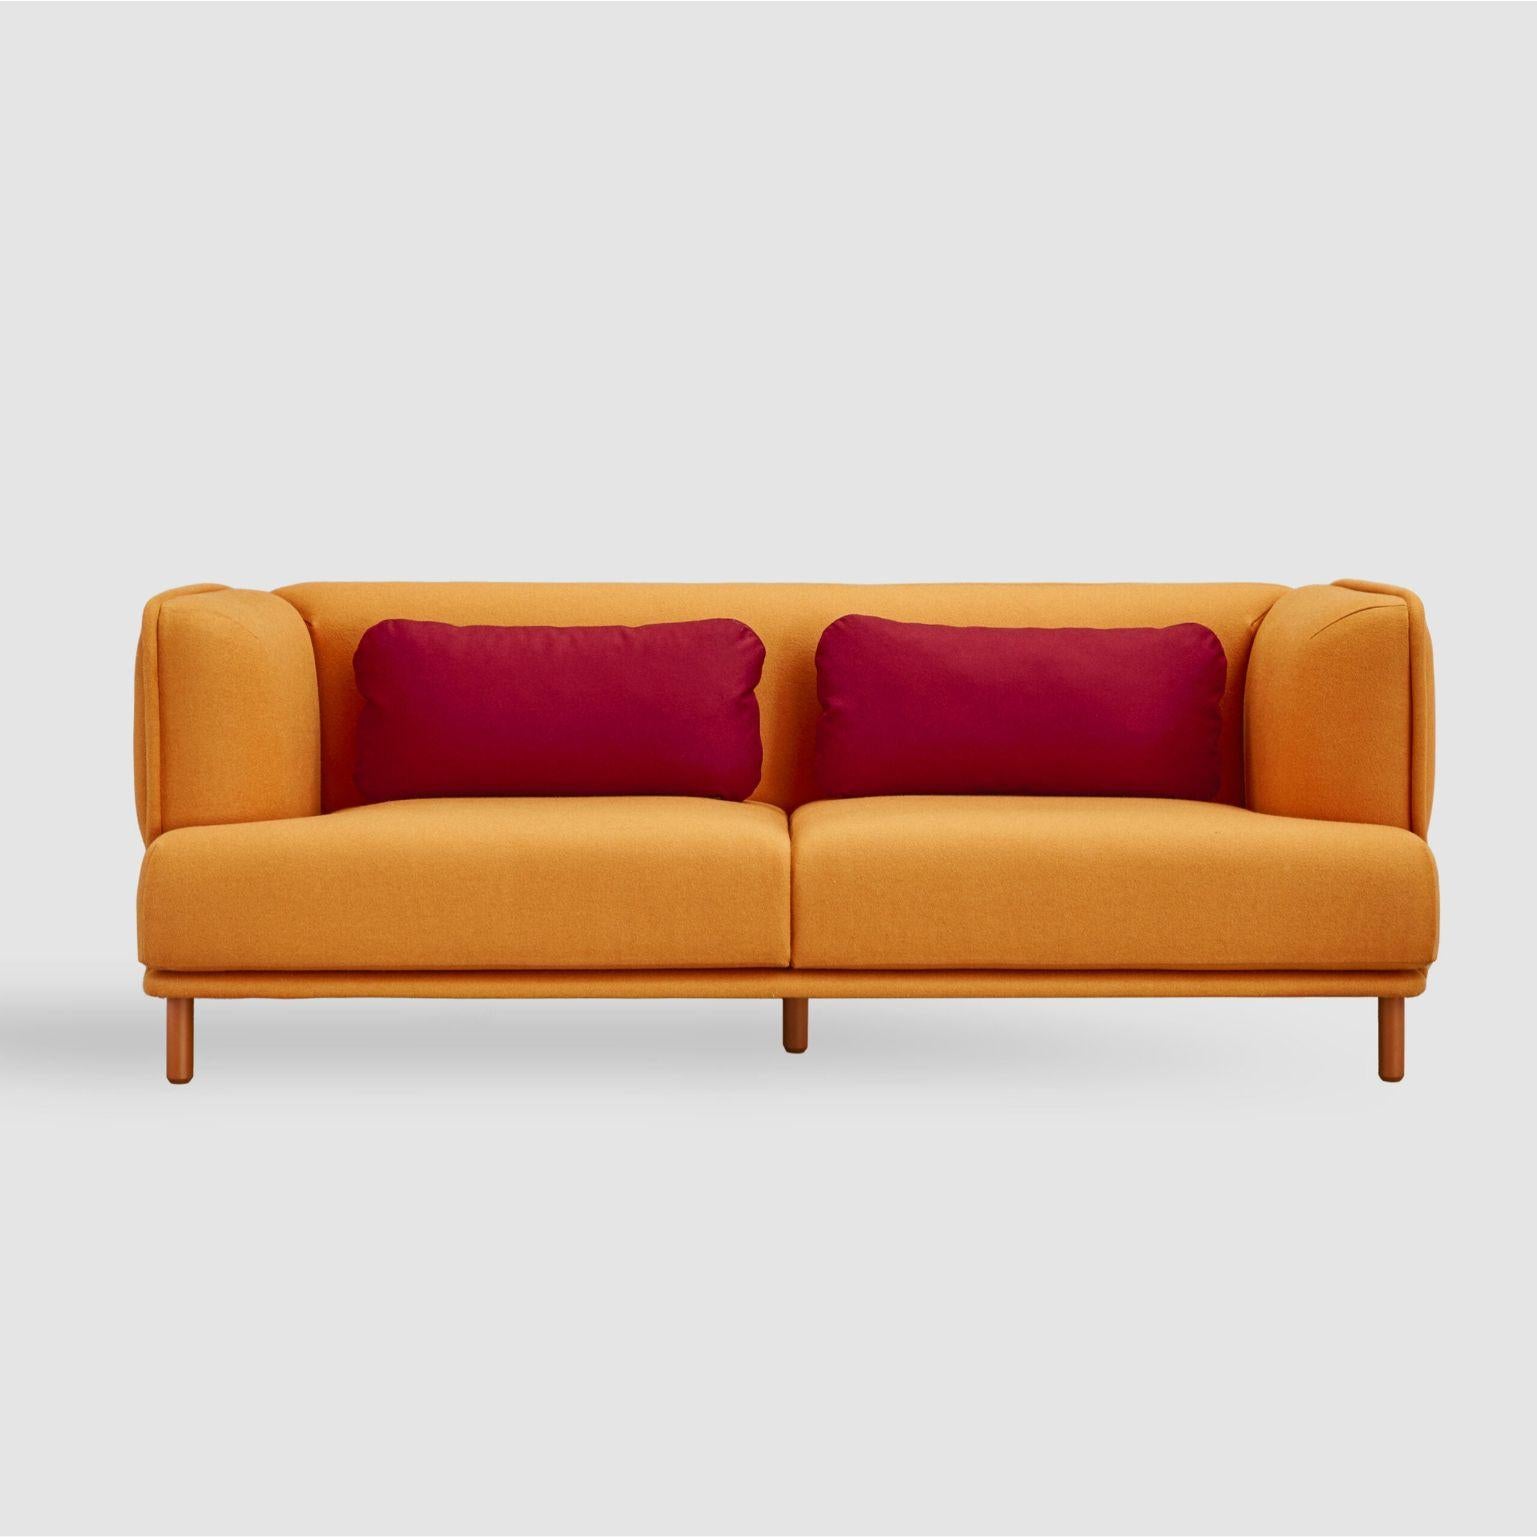 Hug sofa, maxi by Cristian Reyes
Dimensions: W226, D95, H73, Seat43
Materials: Pine wood structure reinforced with plywood and tablex
Backrest is 50% goose feather and 50% polyester fibre
Foam CMHR (high resilience and flame retardant) for all